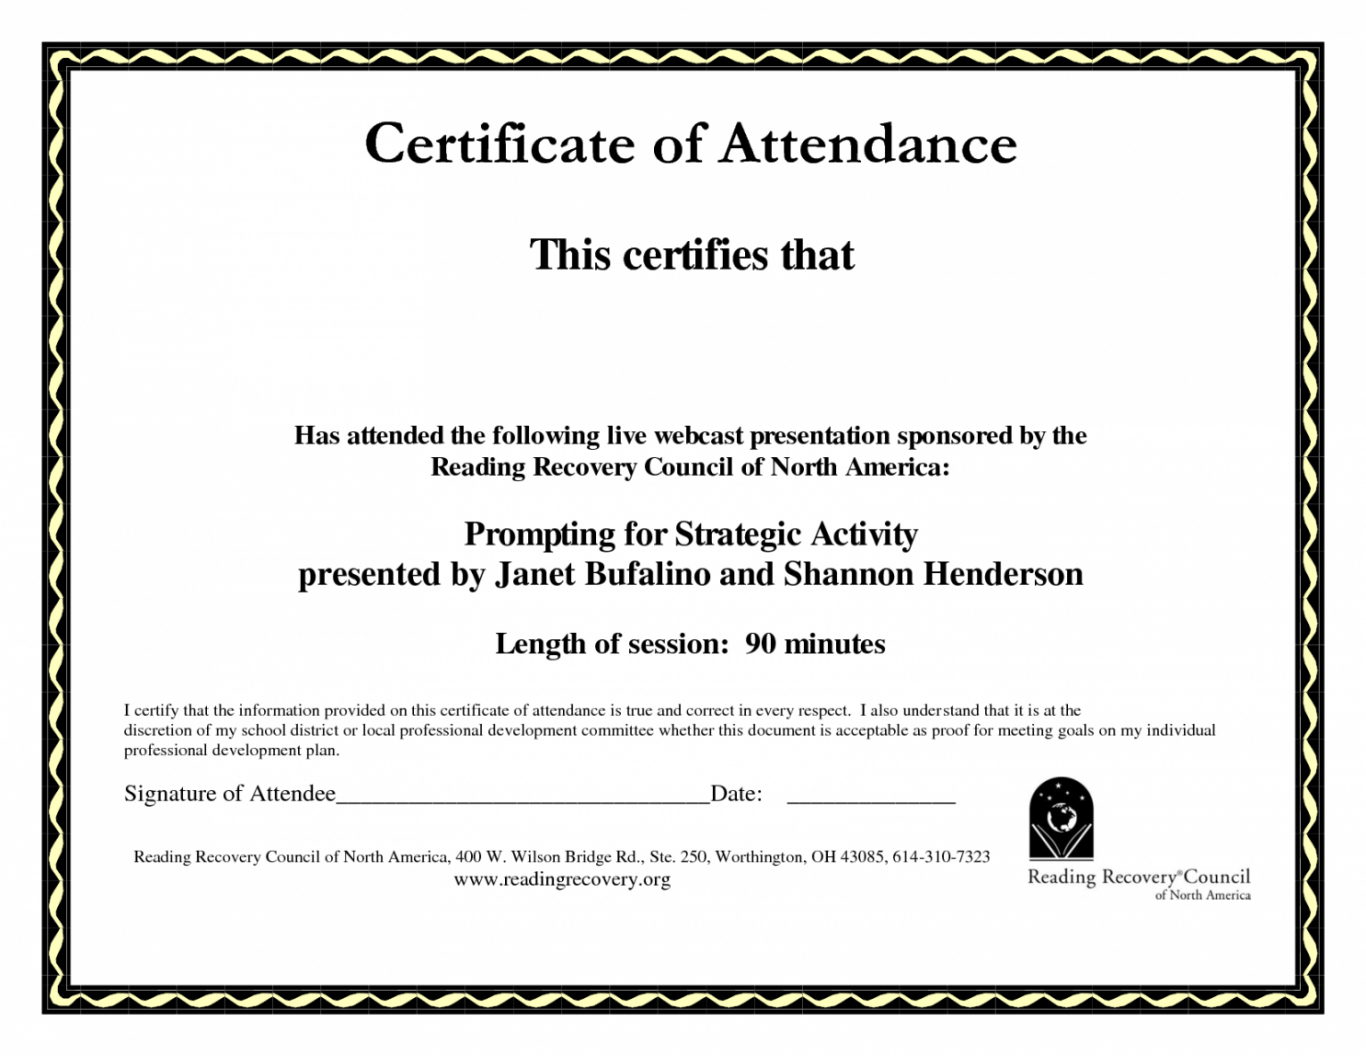 Stupendous Perfect Attendance Certificate Printable | Dora's Pertaining To Perfect Attendance Certificate Free Template